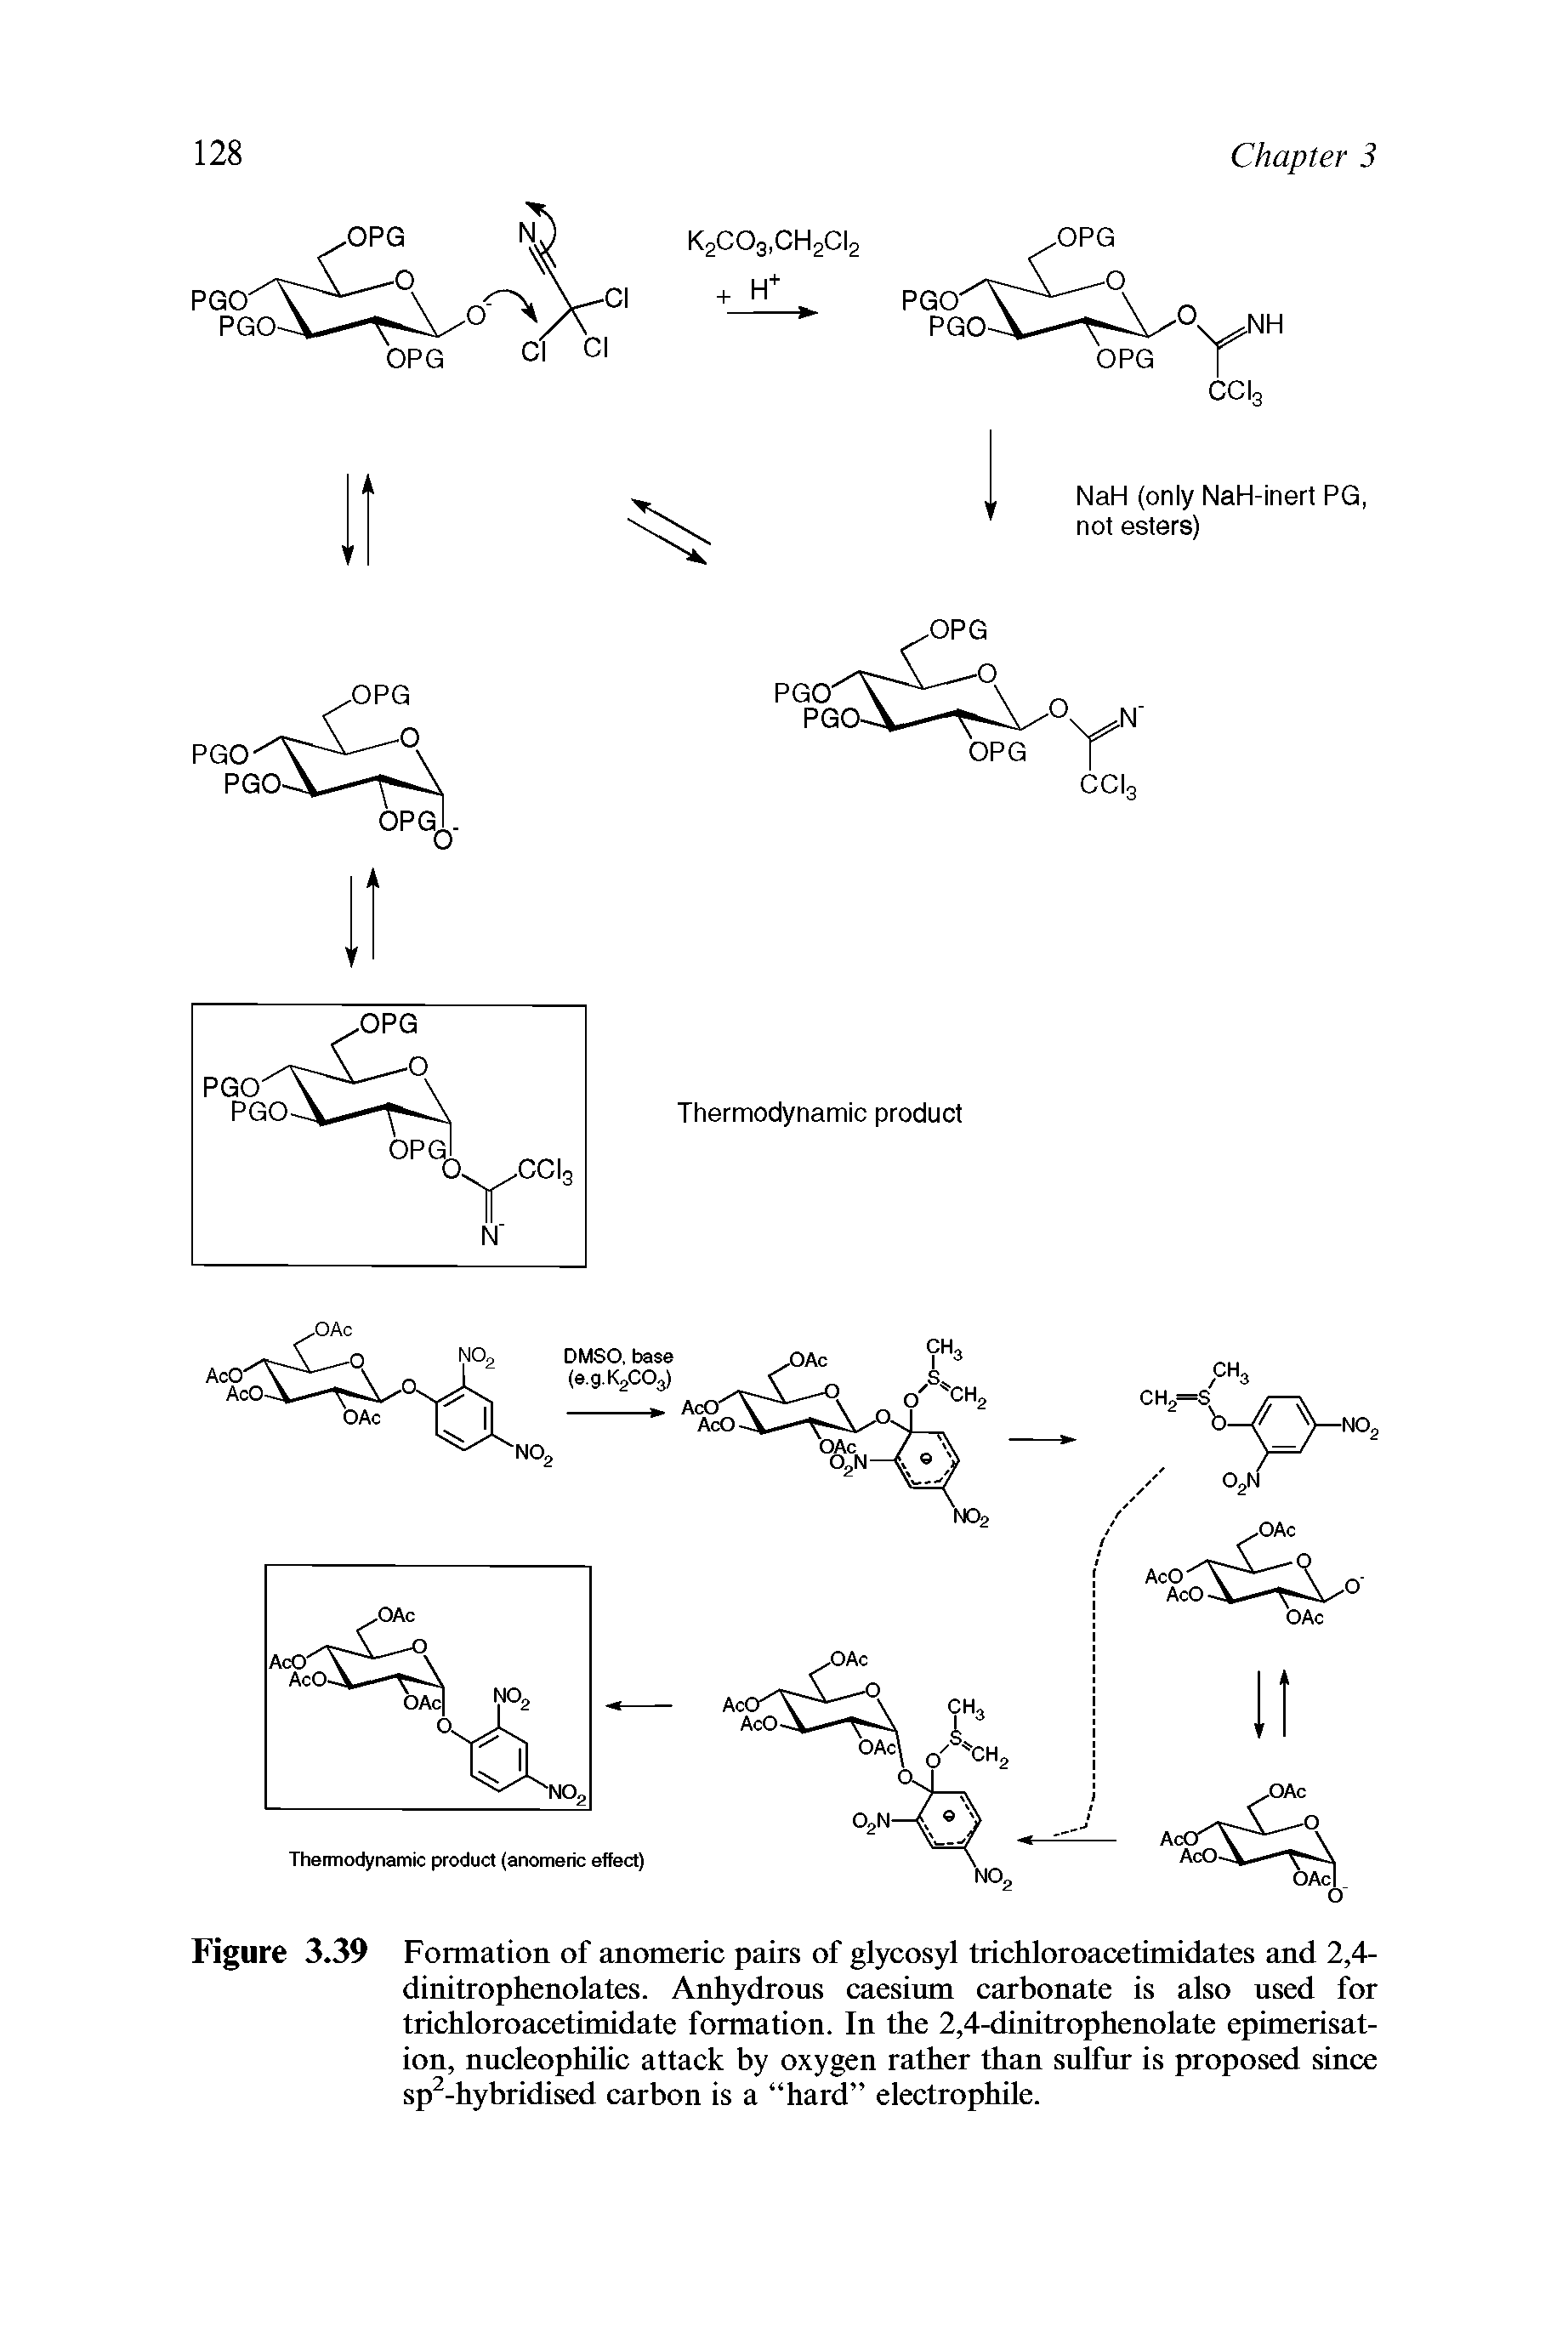 Figure 3.39 Formation of anomeric pairs of glycosyl trichloroacetimidates and 2,4-dinitrophenolates. Anhydrous caesium carbonate is also used for trichloroacetimidate formation. In the 2,4-dinitrophenolate epimerisat-ion, nucleophilic attack by oxygen rather than sulfur is proposed since sp -hybridised carbon is a hard electrophile.